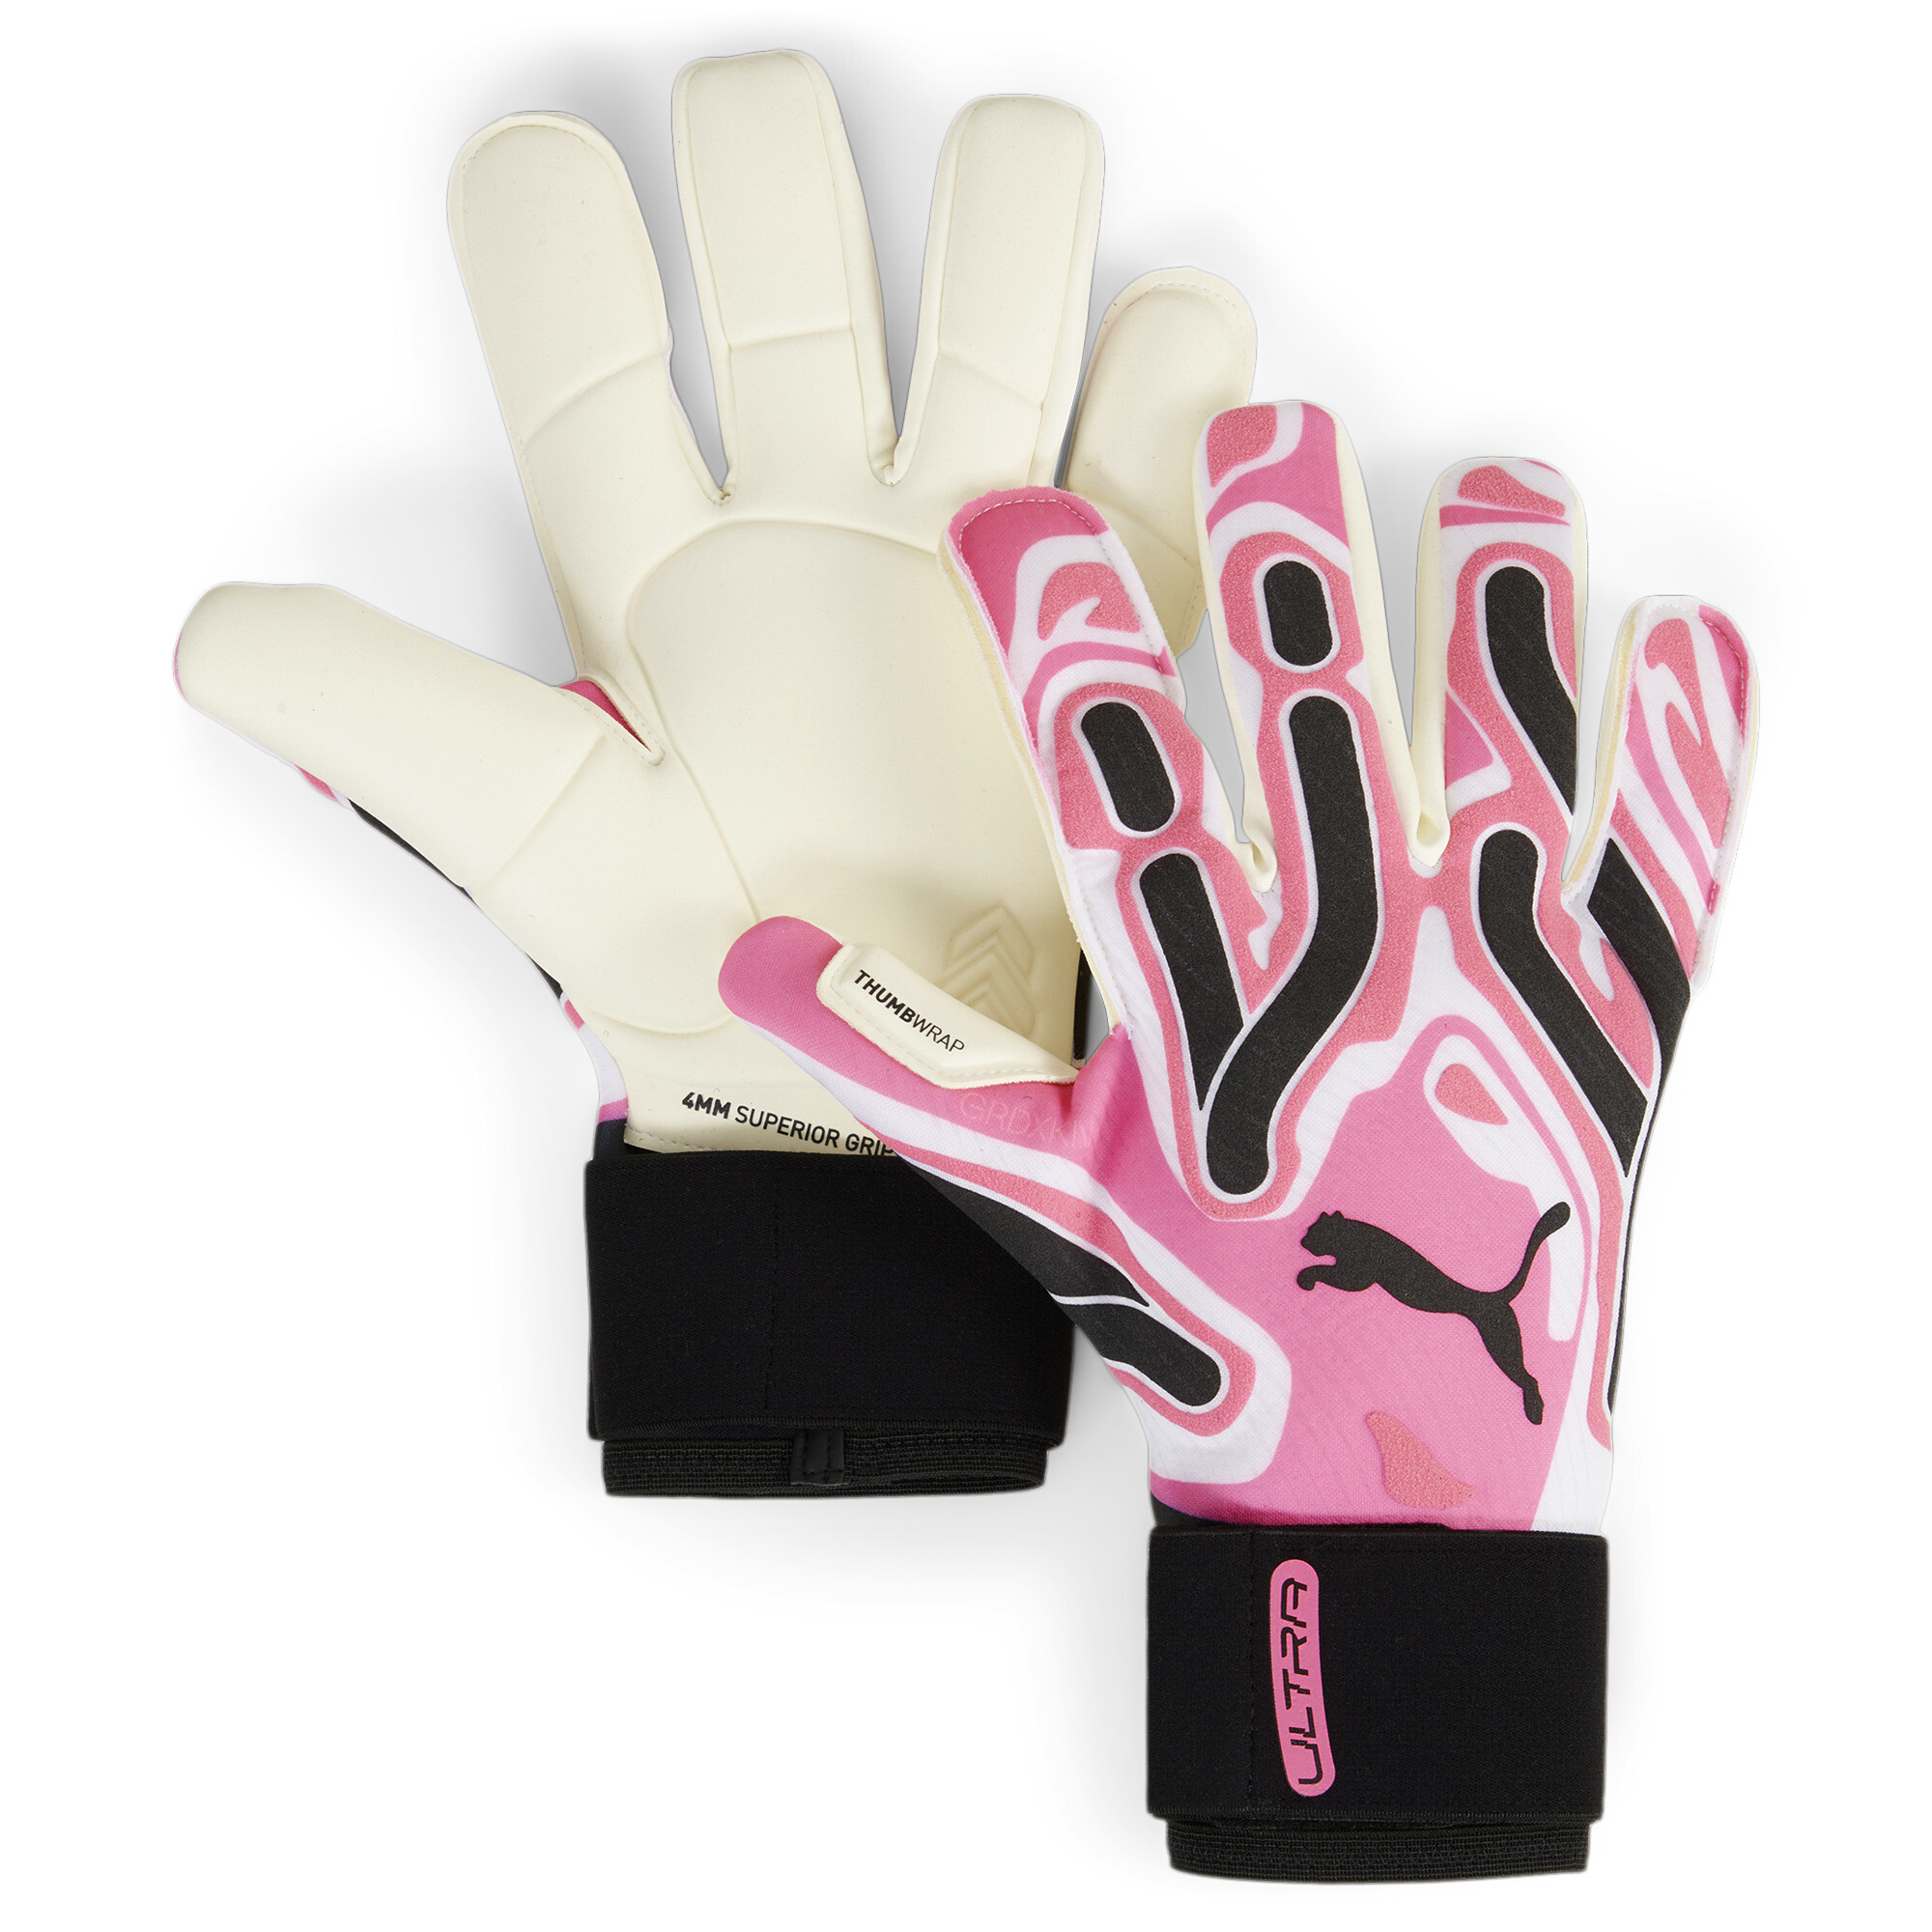 Puma ULTRA Ultimate Hybrid Goalkeeper Gloves, Pink, Size 11, Accessories